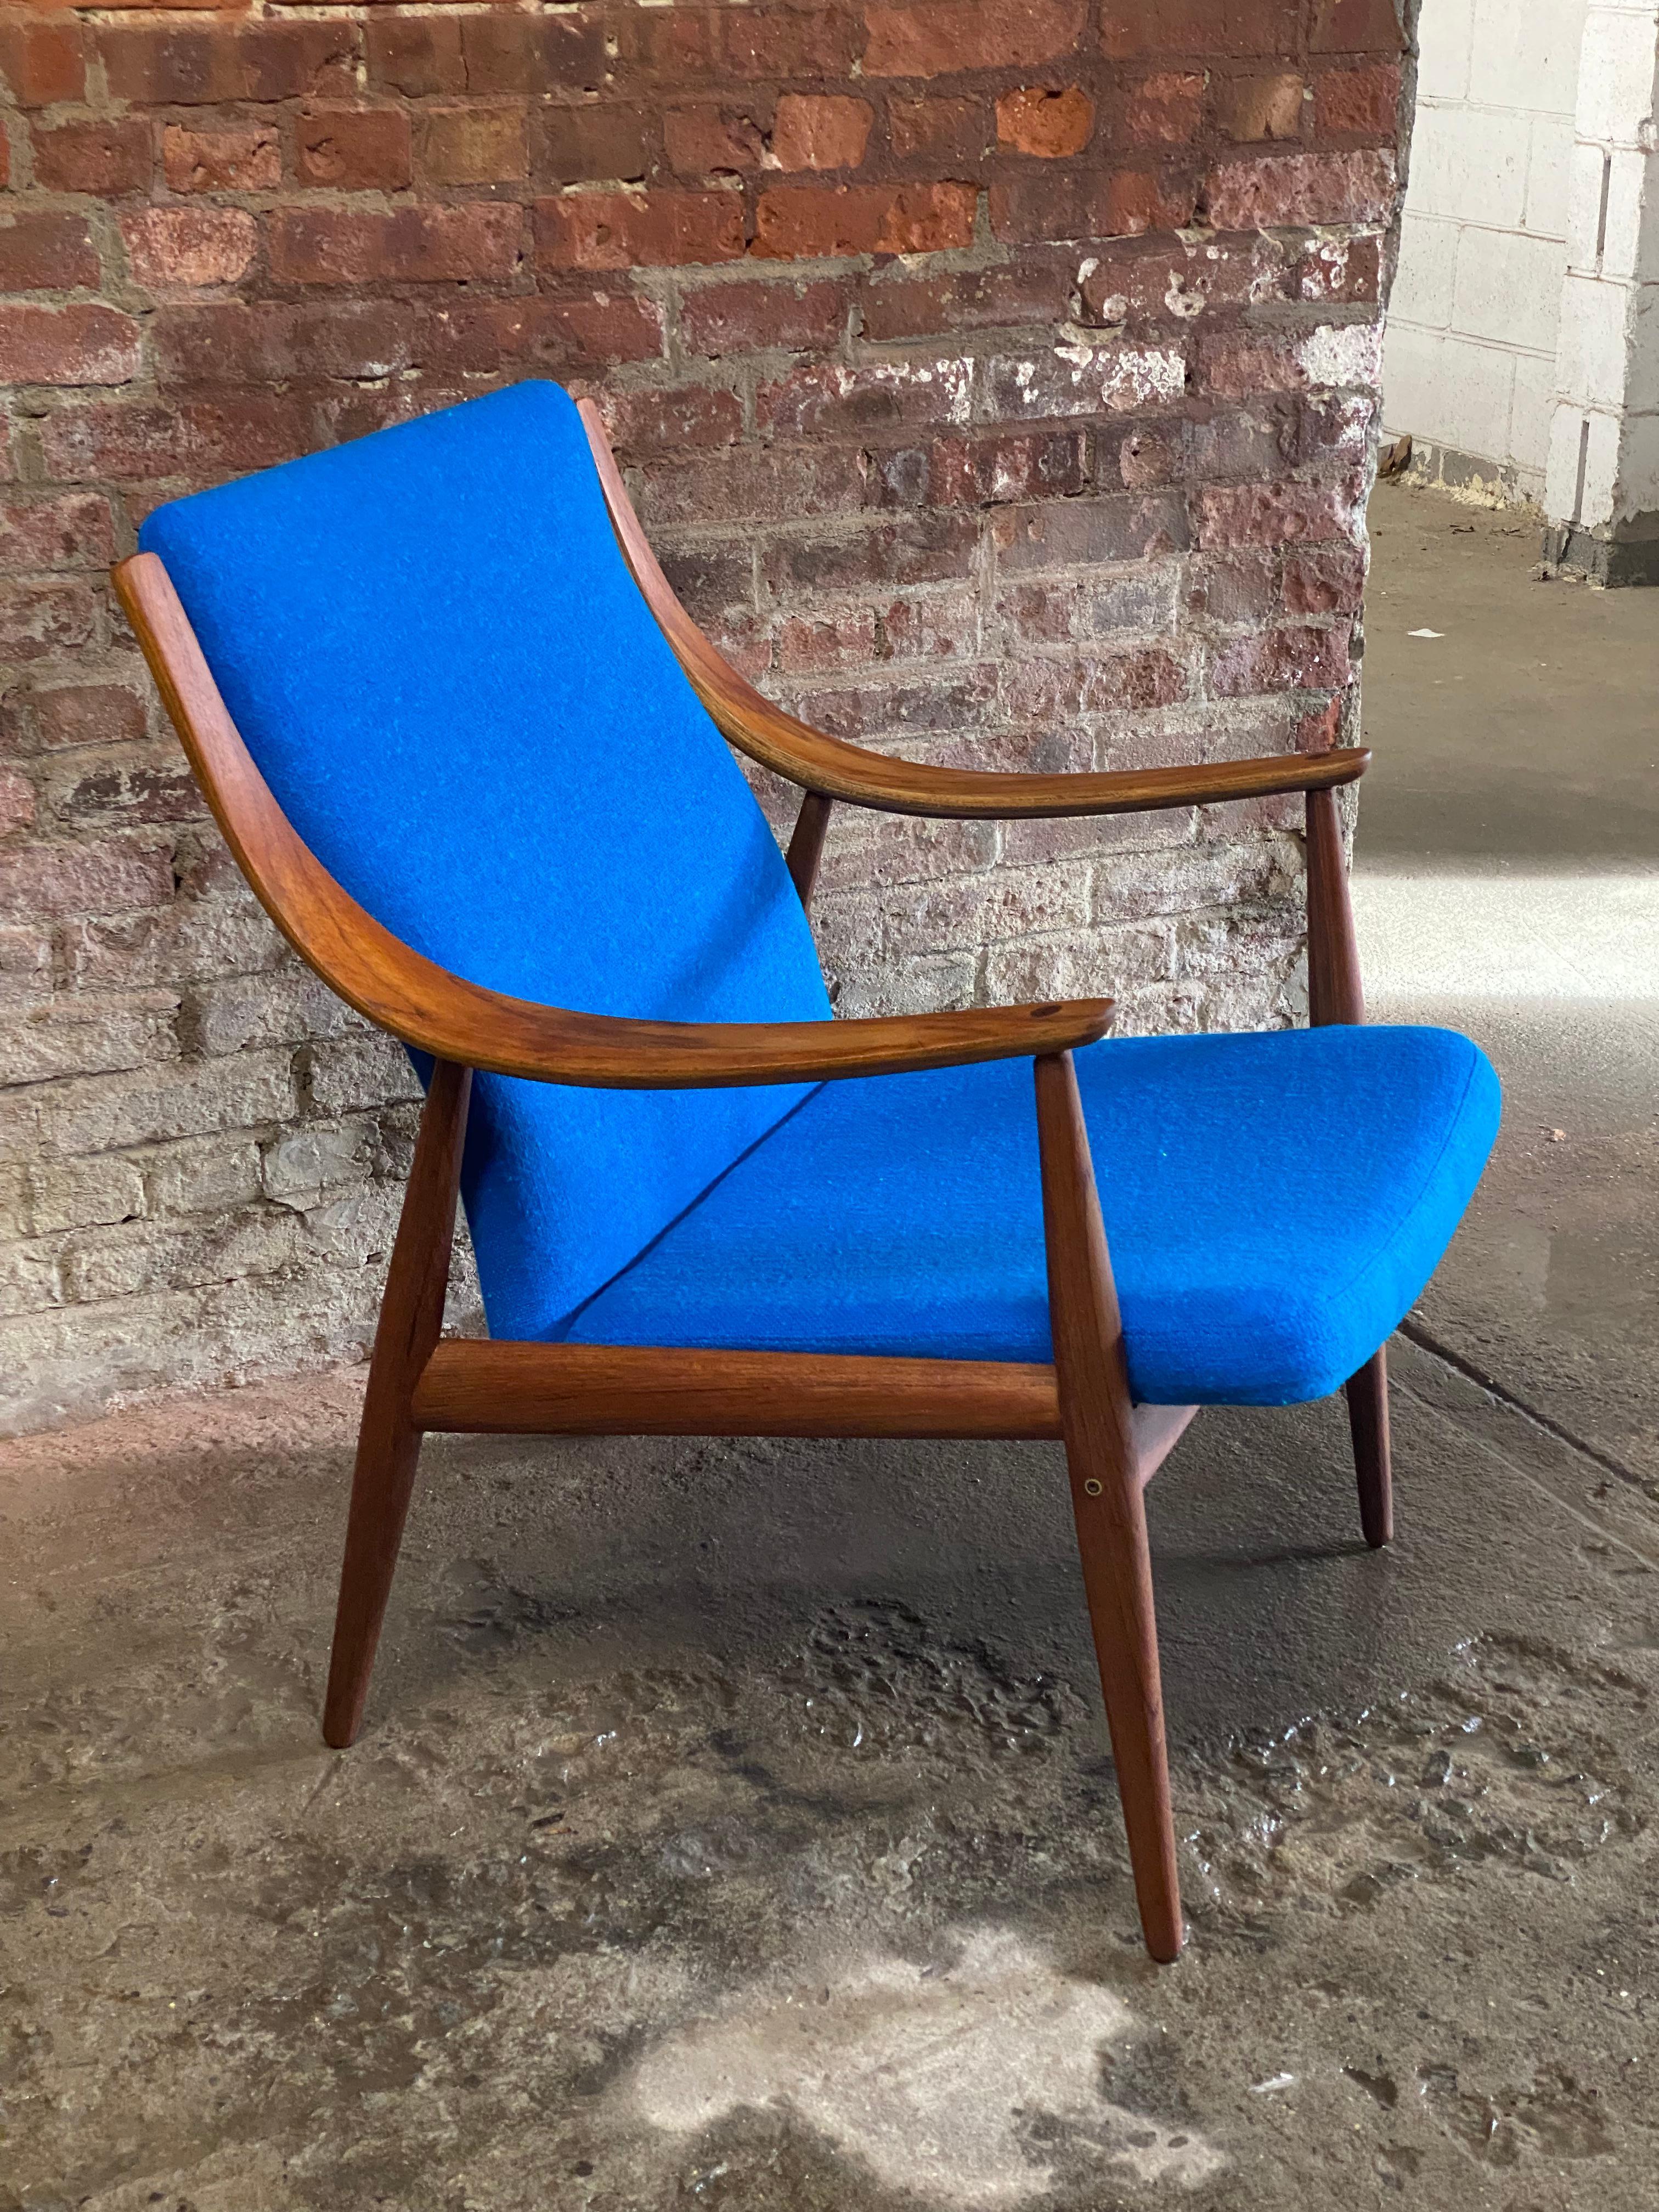 Peter Hvidt and Orla Mølgaard-Nielsen teak scoop armchair. Manufactured in Denmark by France and Daverkosen. Freshly upholstered fabric and cushion back and seat. John Stuart enamel button. Circa 1950-60.

Structurally sound and sturdy design.